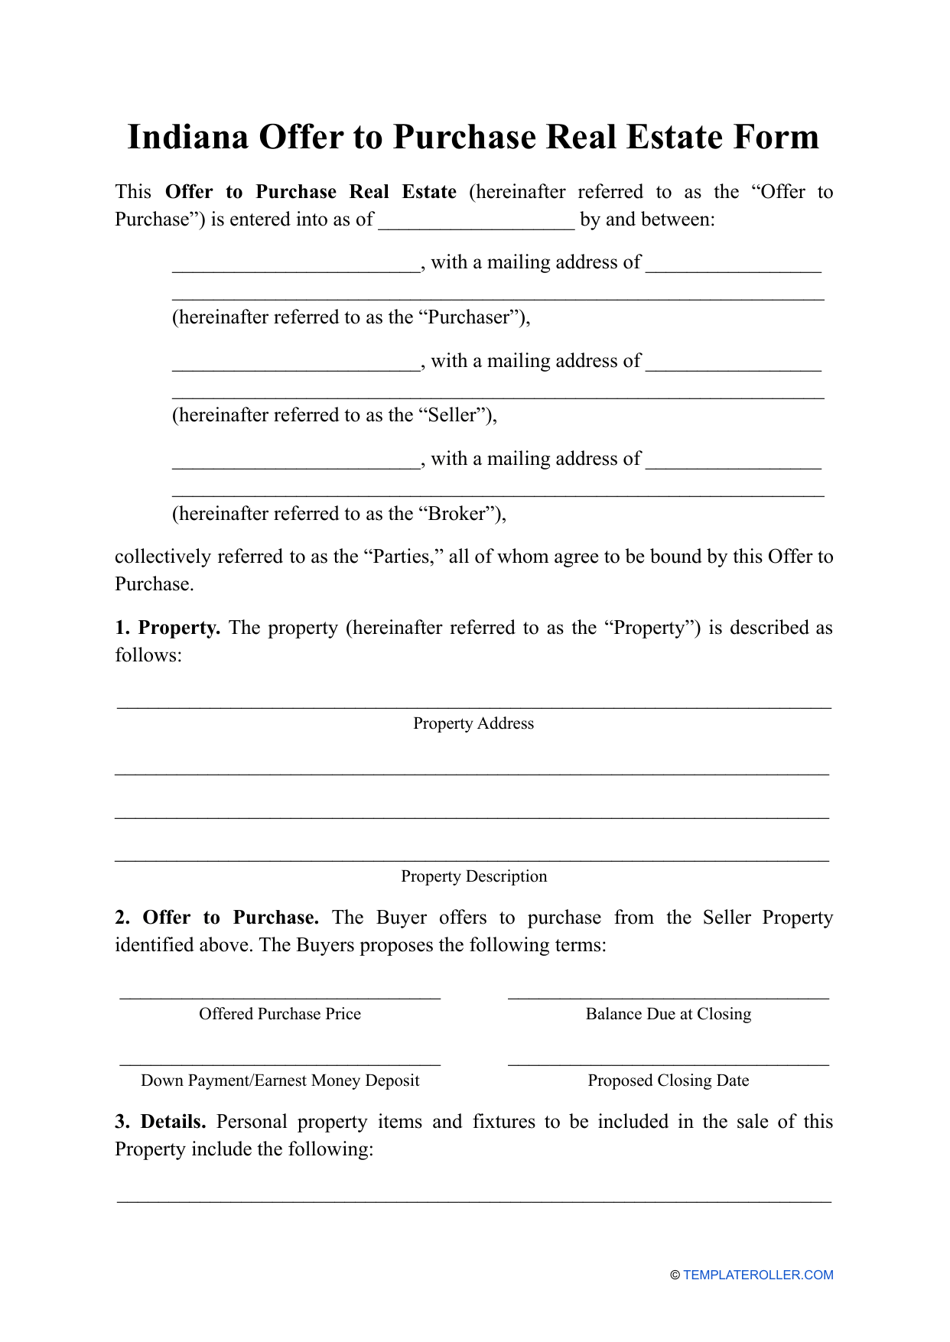 Offer to Purchase Real Estate Form - Indiana, Page 1